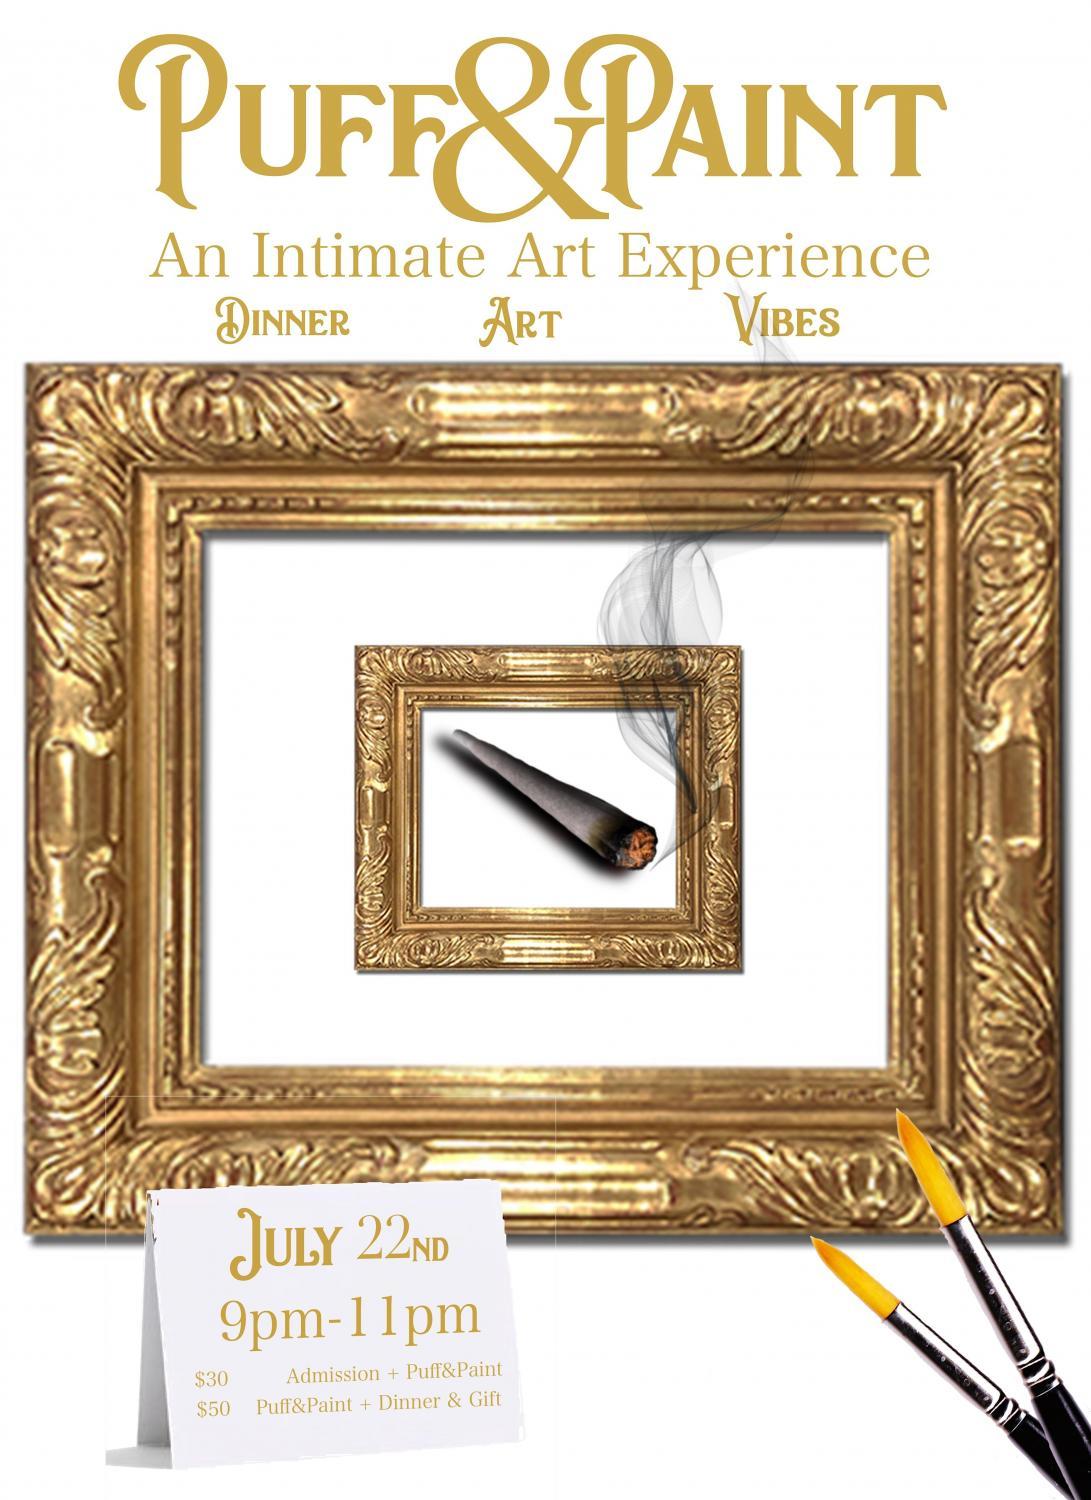 Puff & Paint 'An intimate Art Experience